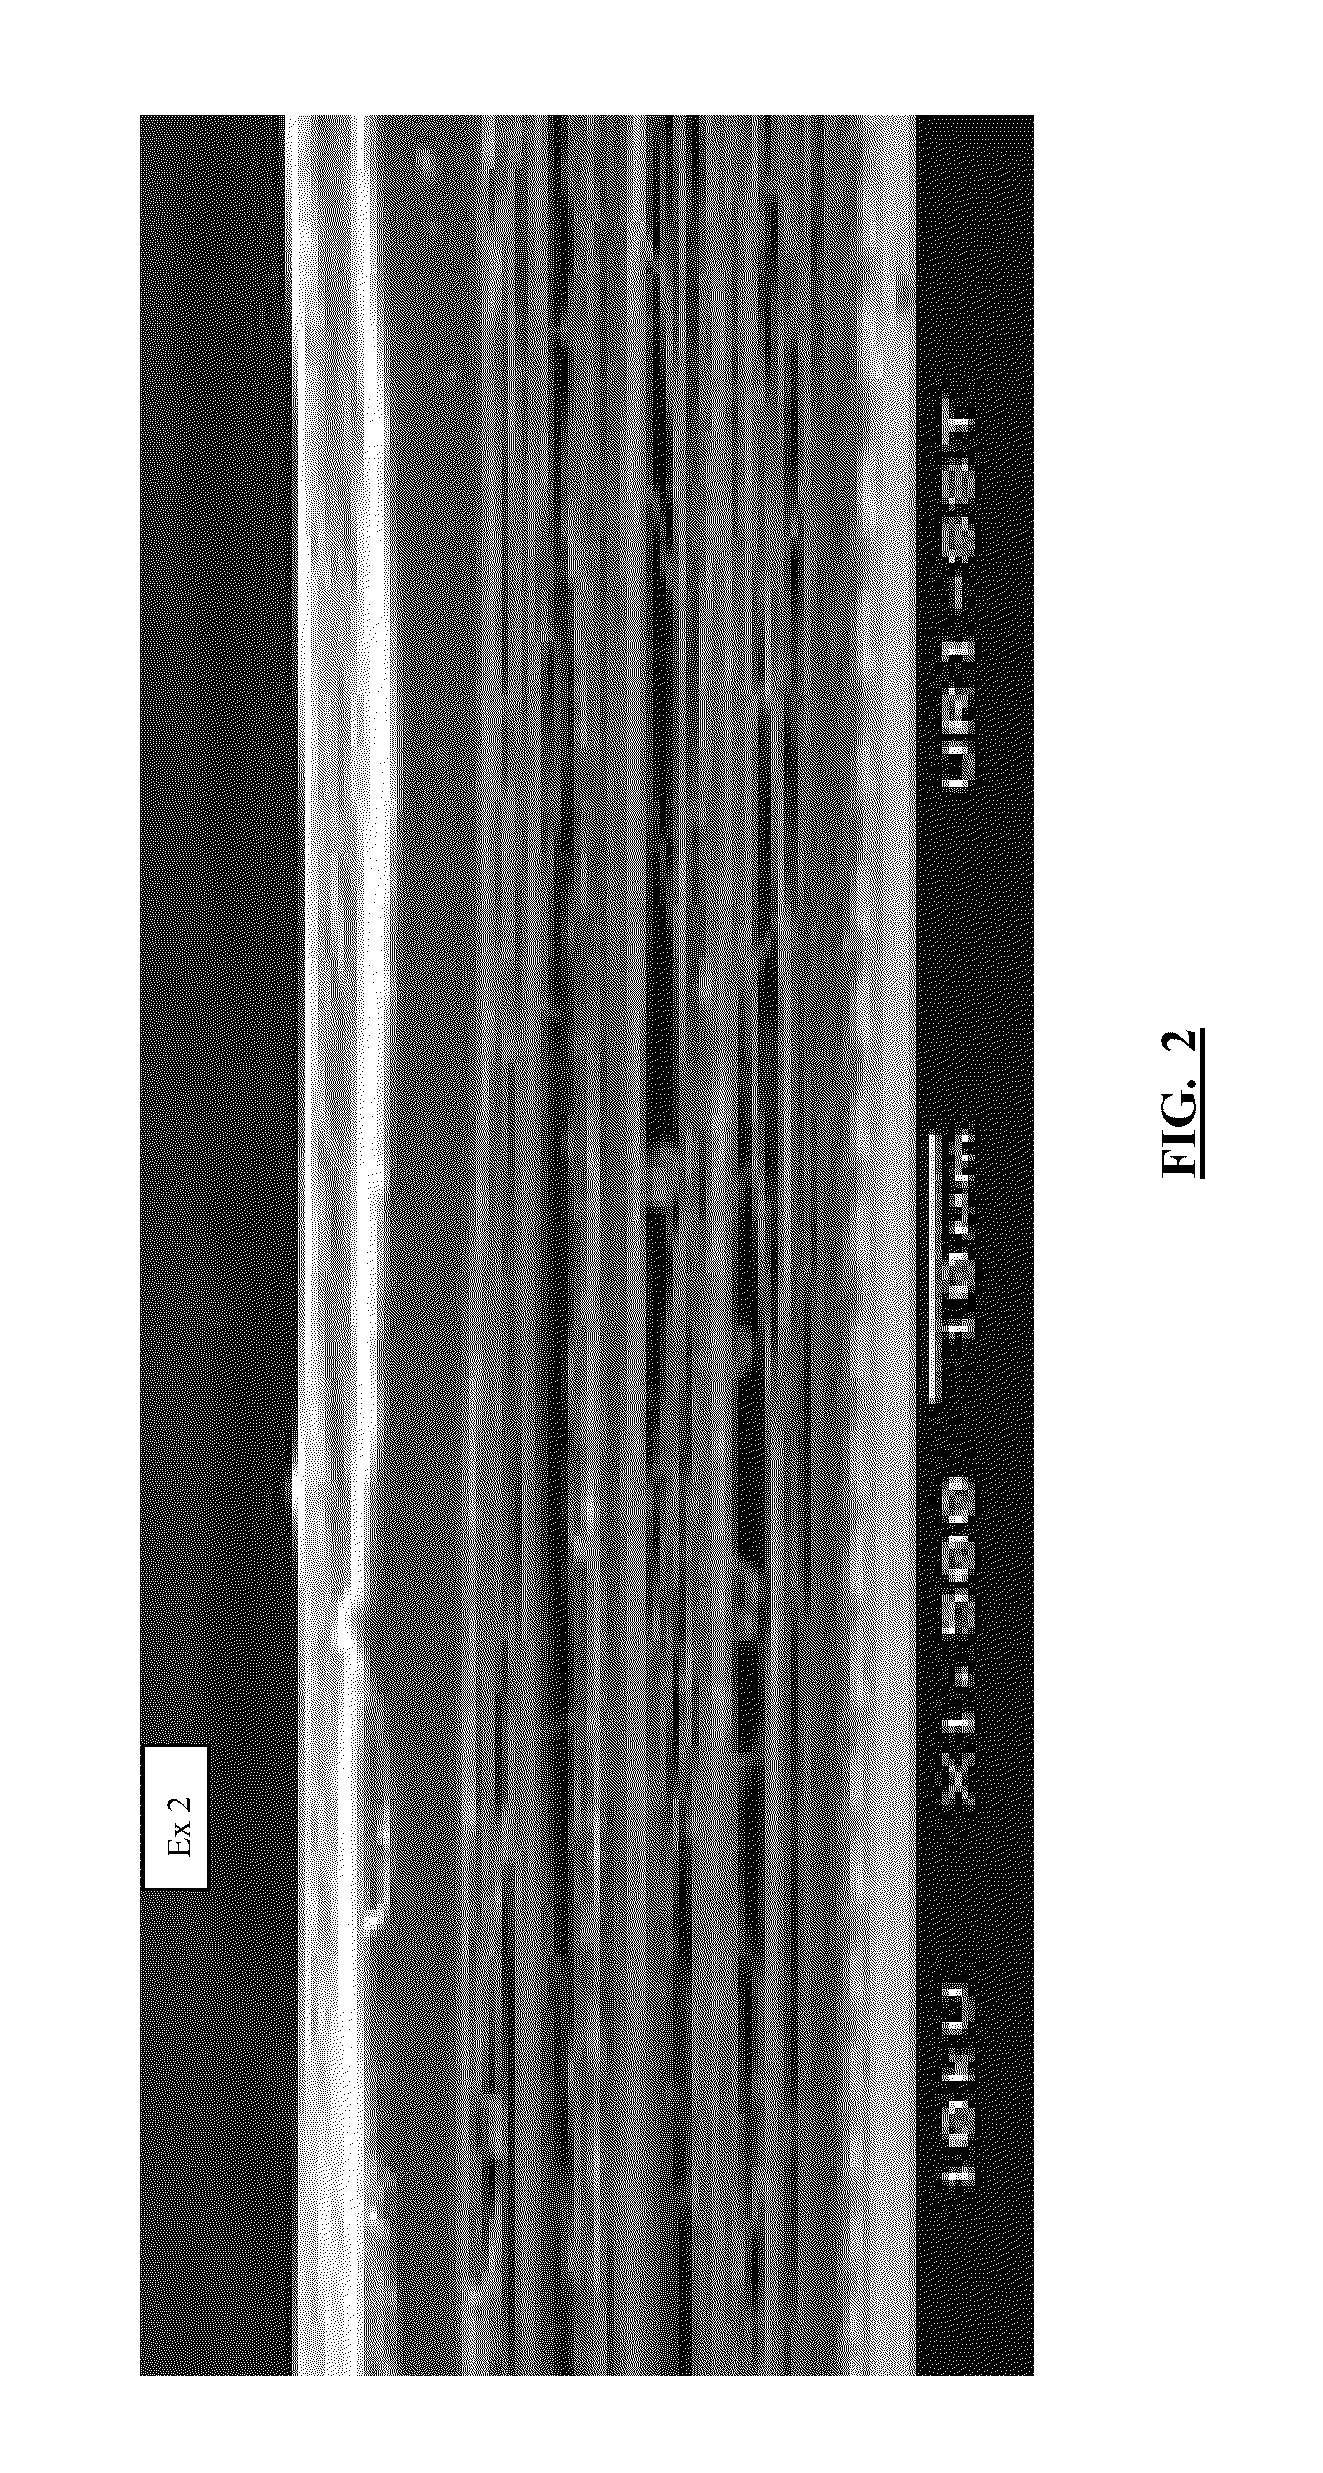 Method to produce matte and opaque biaxially oriented polylactic acid film